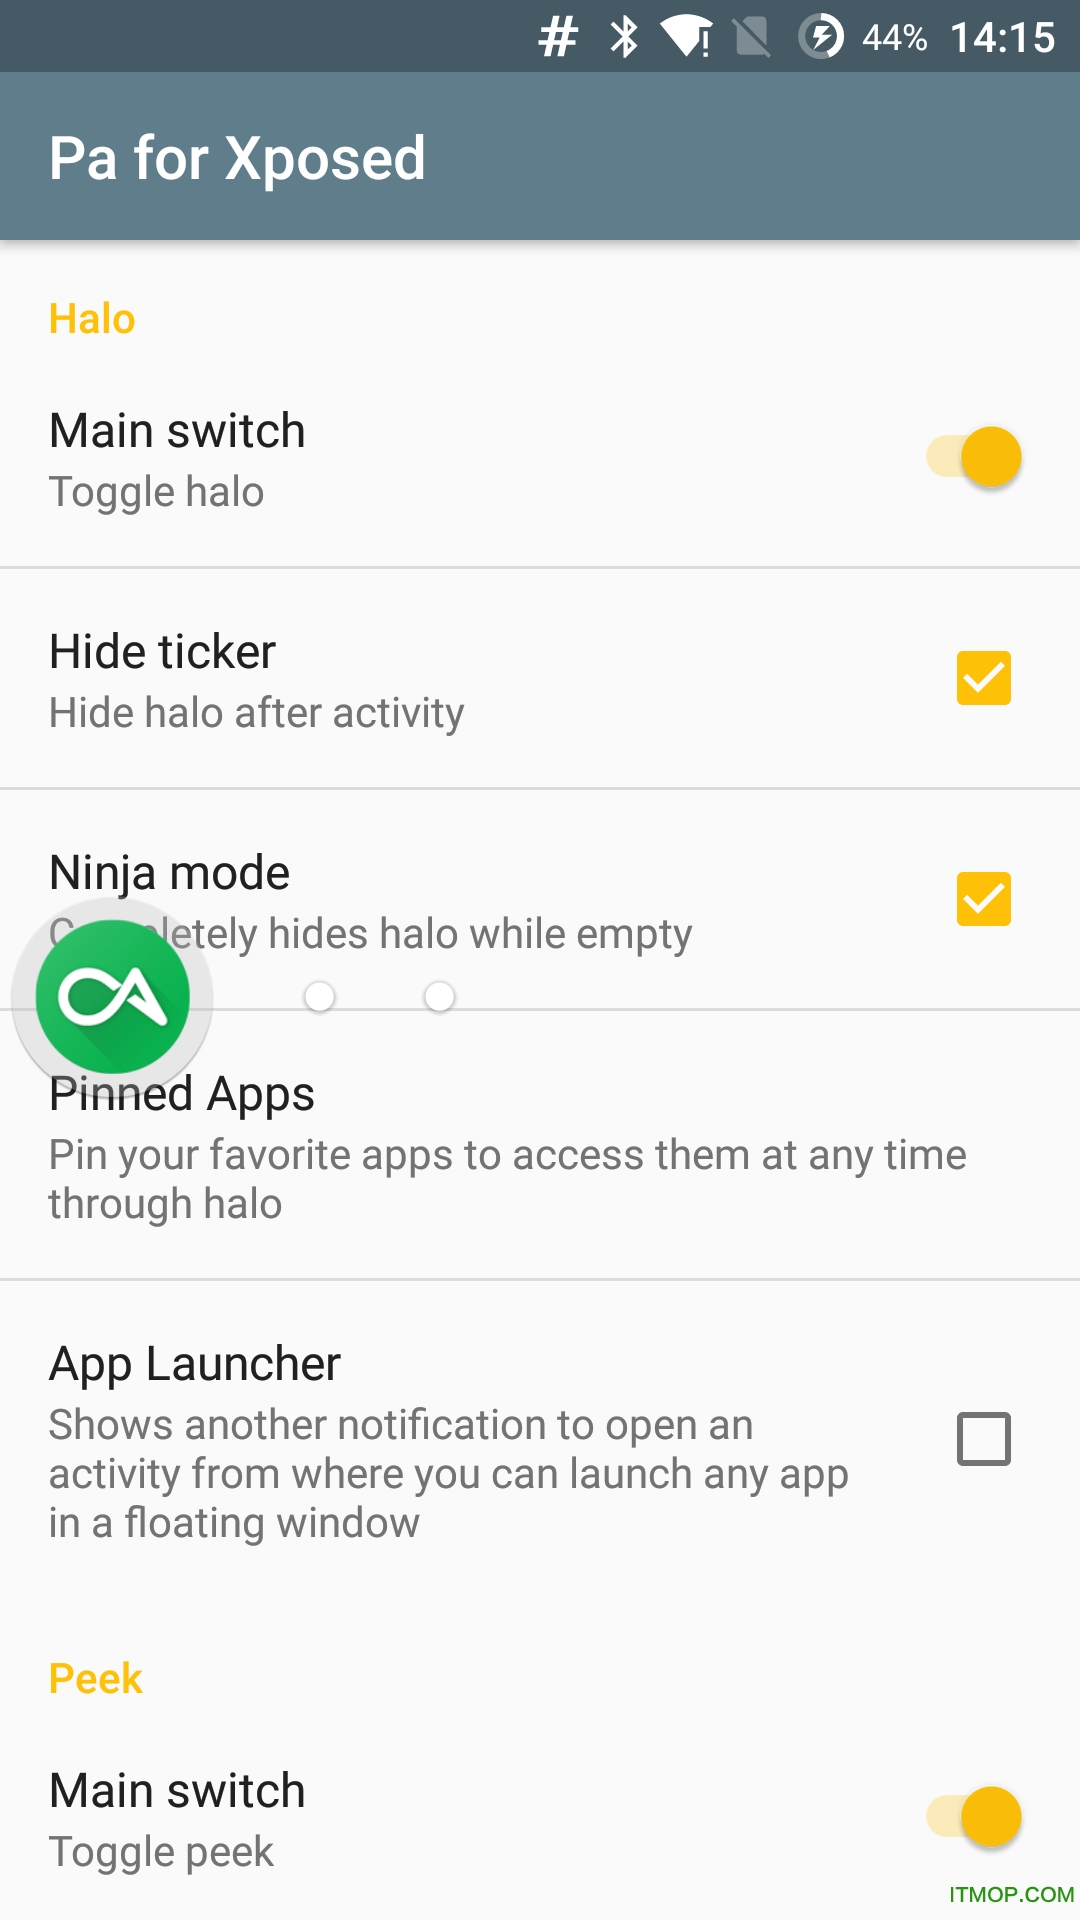 Pa for Xposed(Unique Controls Android) v0.317 ׿1